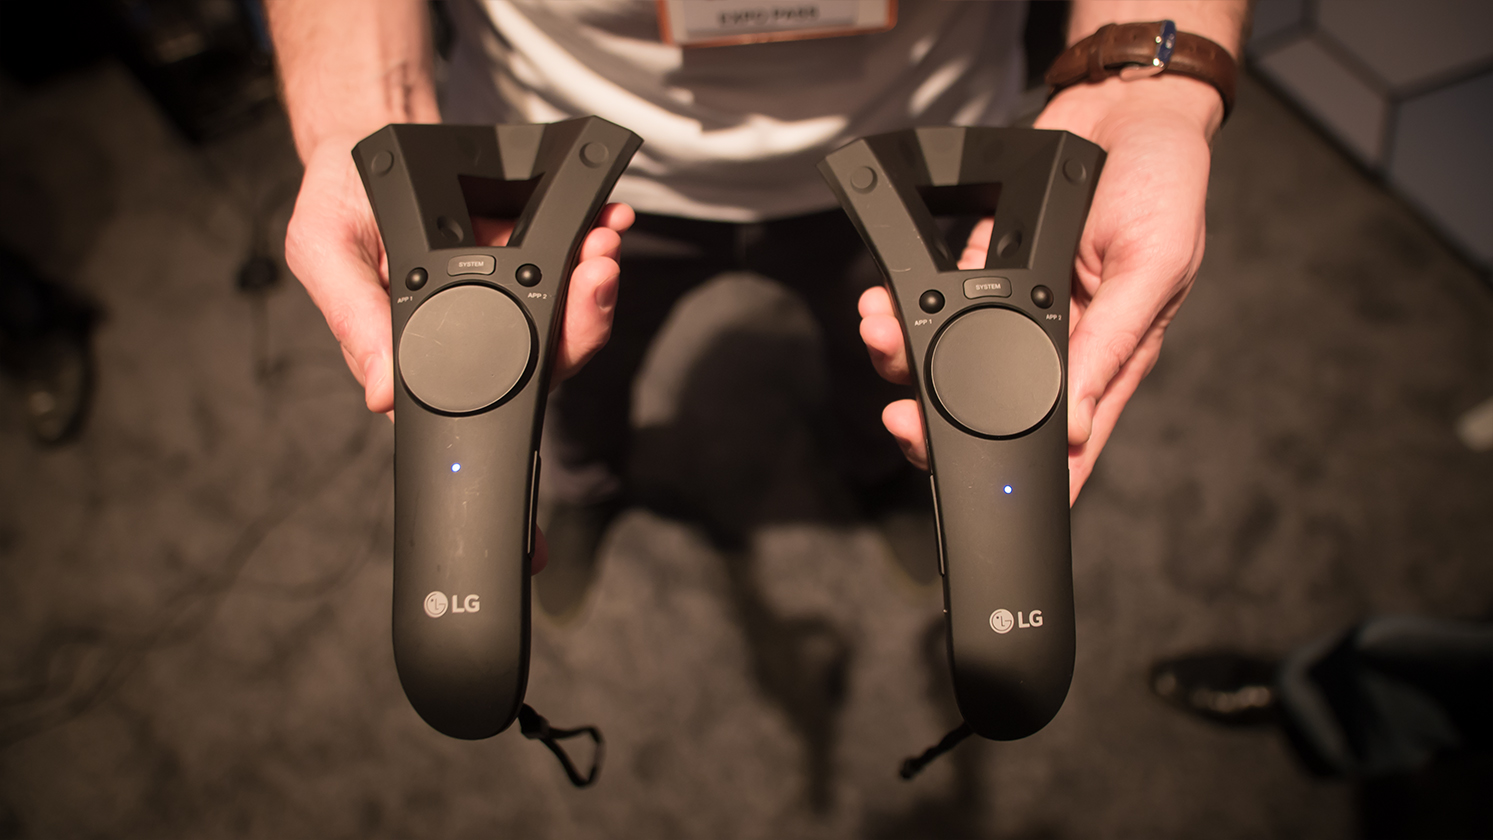 lg vr controllers